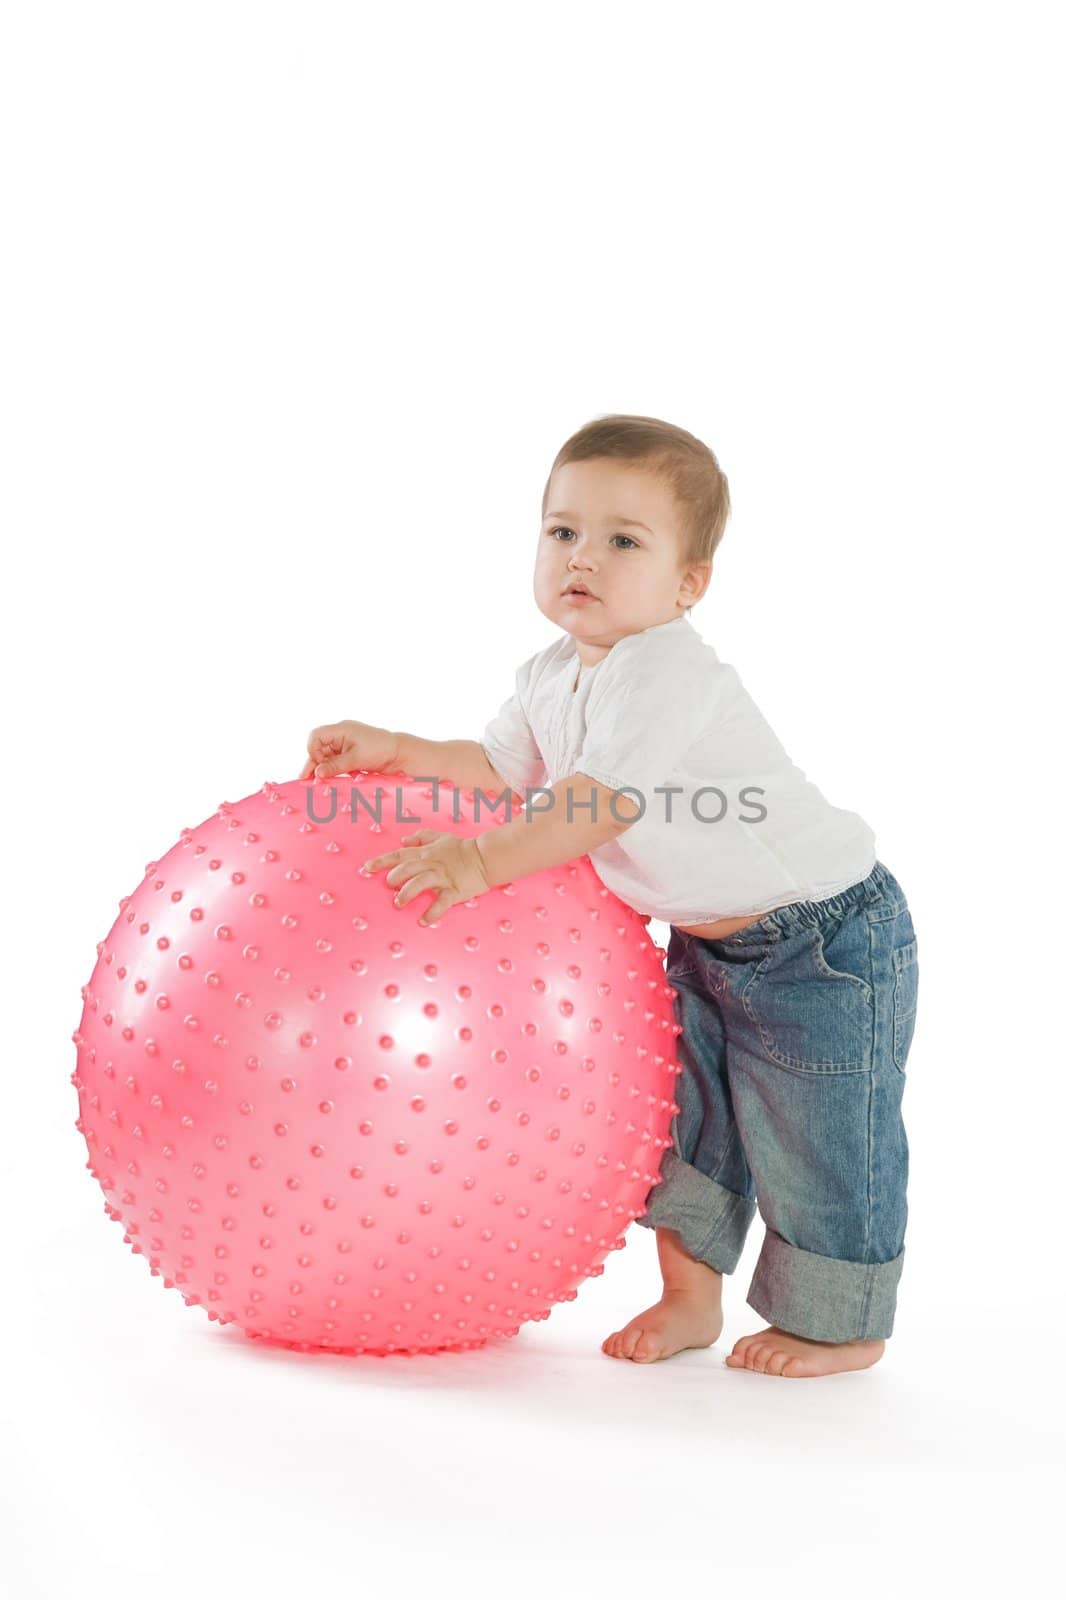 A little boy with a big pink fitness ball